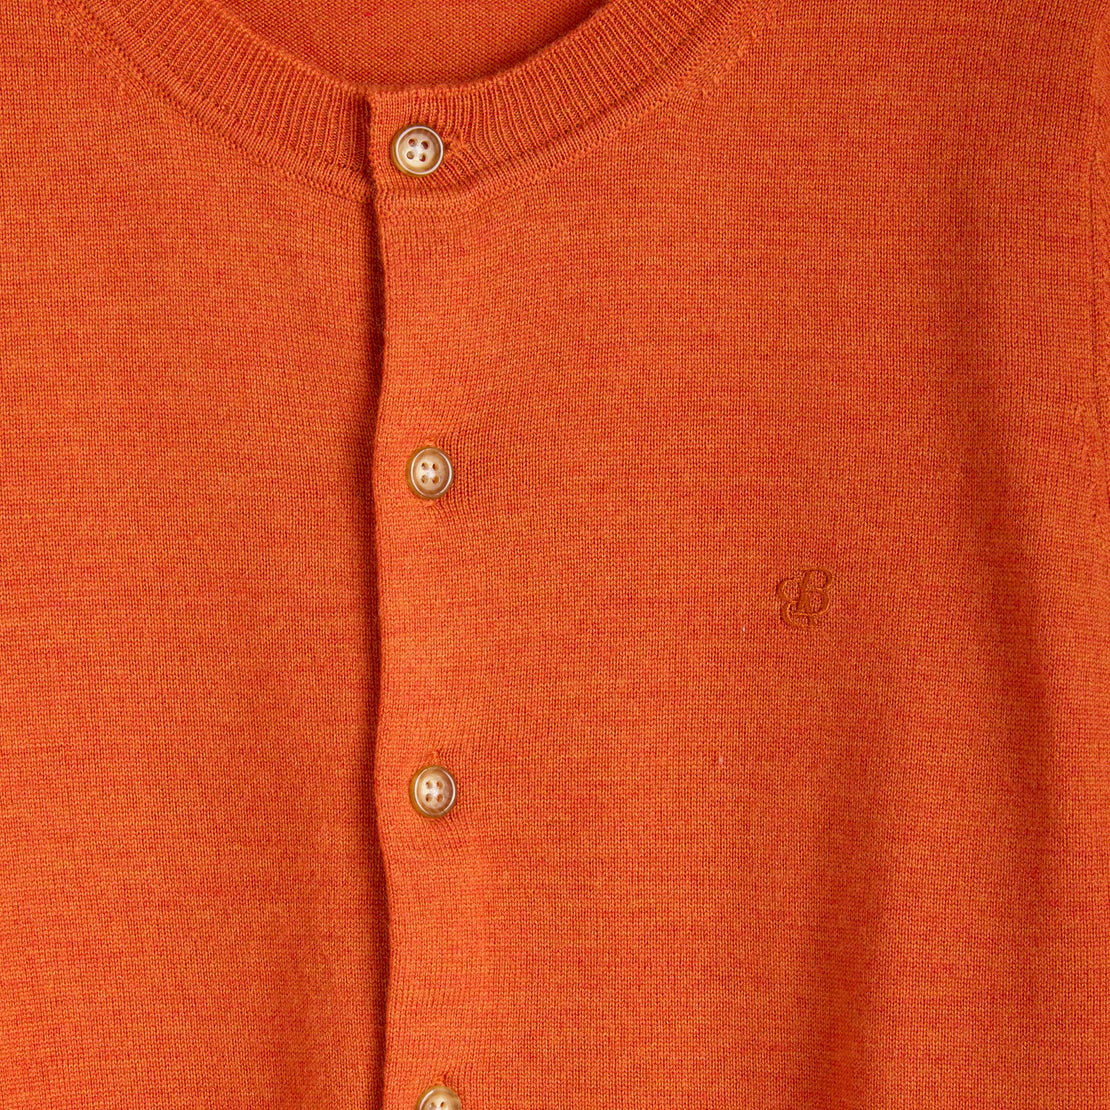 Relaxed Fit Cardigan - Orange - BEAMS BOY - STAG Provisions - W - Tops - Sweater